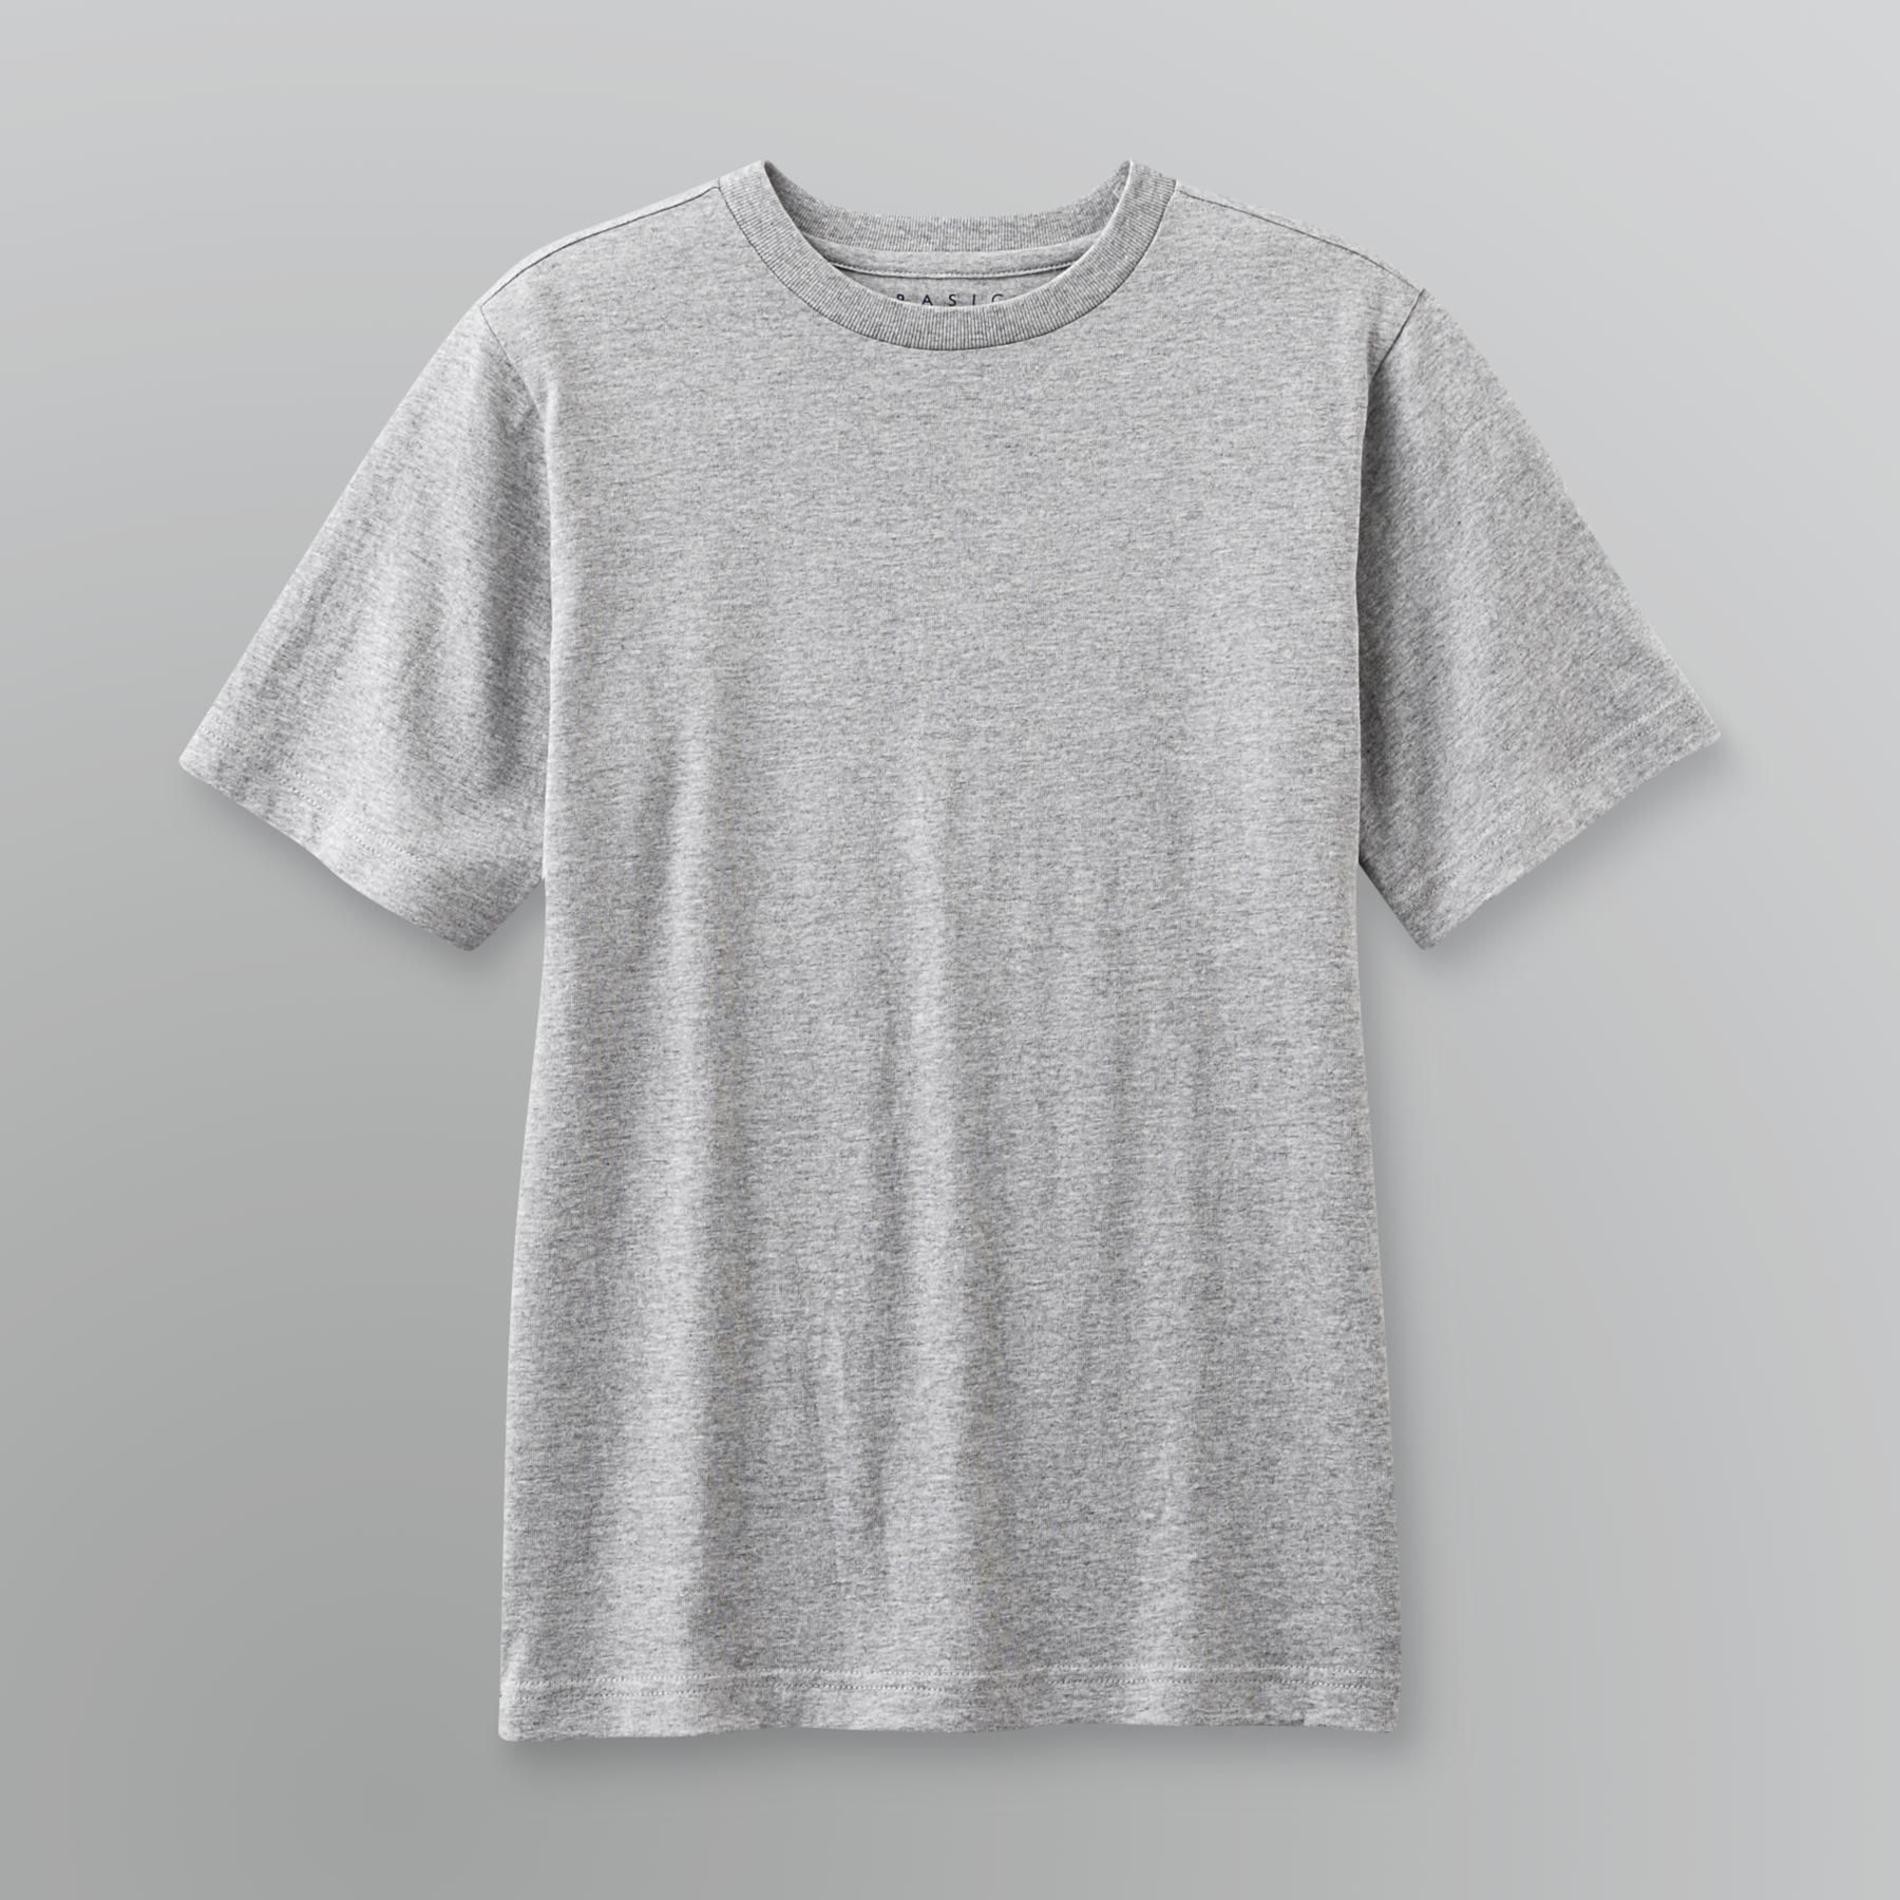 Basic Editions Boy's Solid T-Shirt